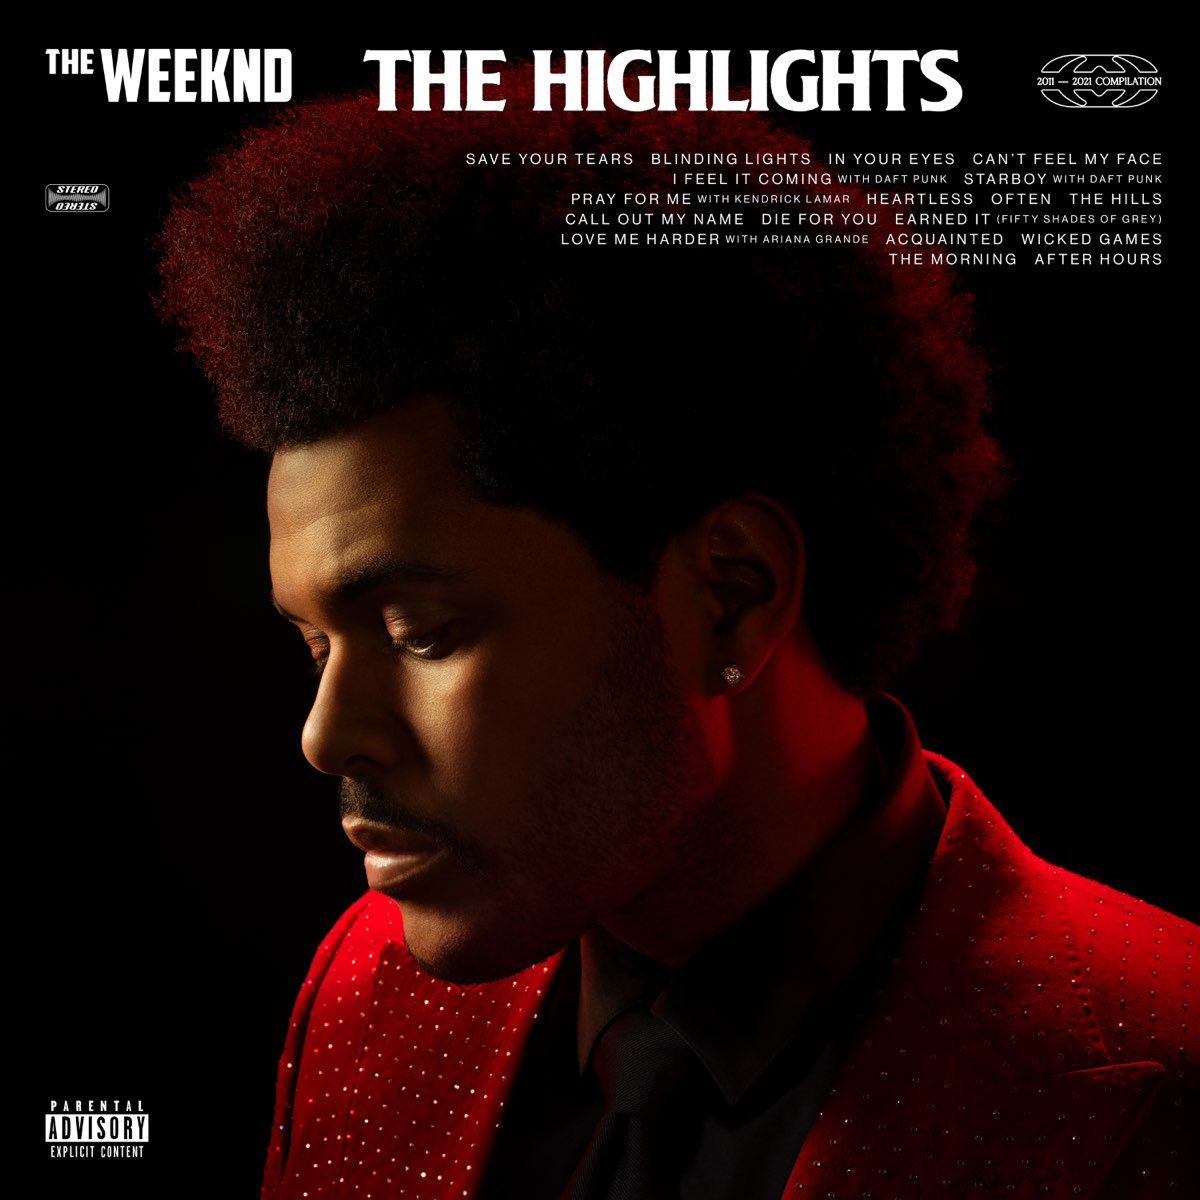 The Weeknd — The Highlights cover artwork